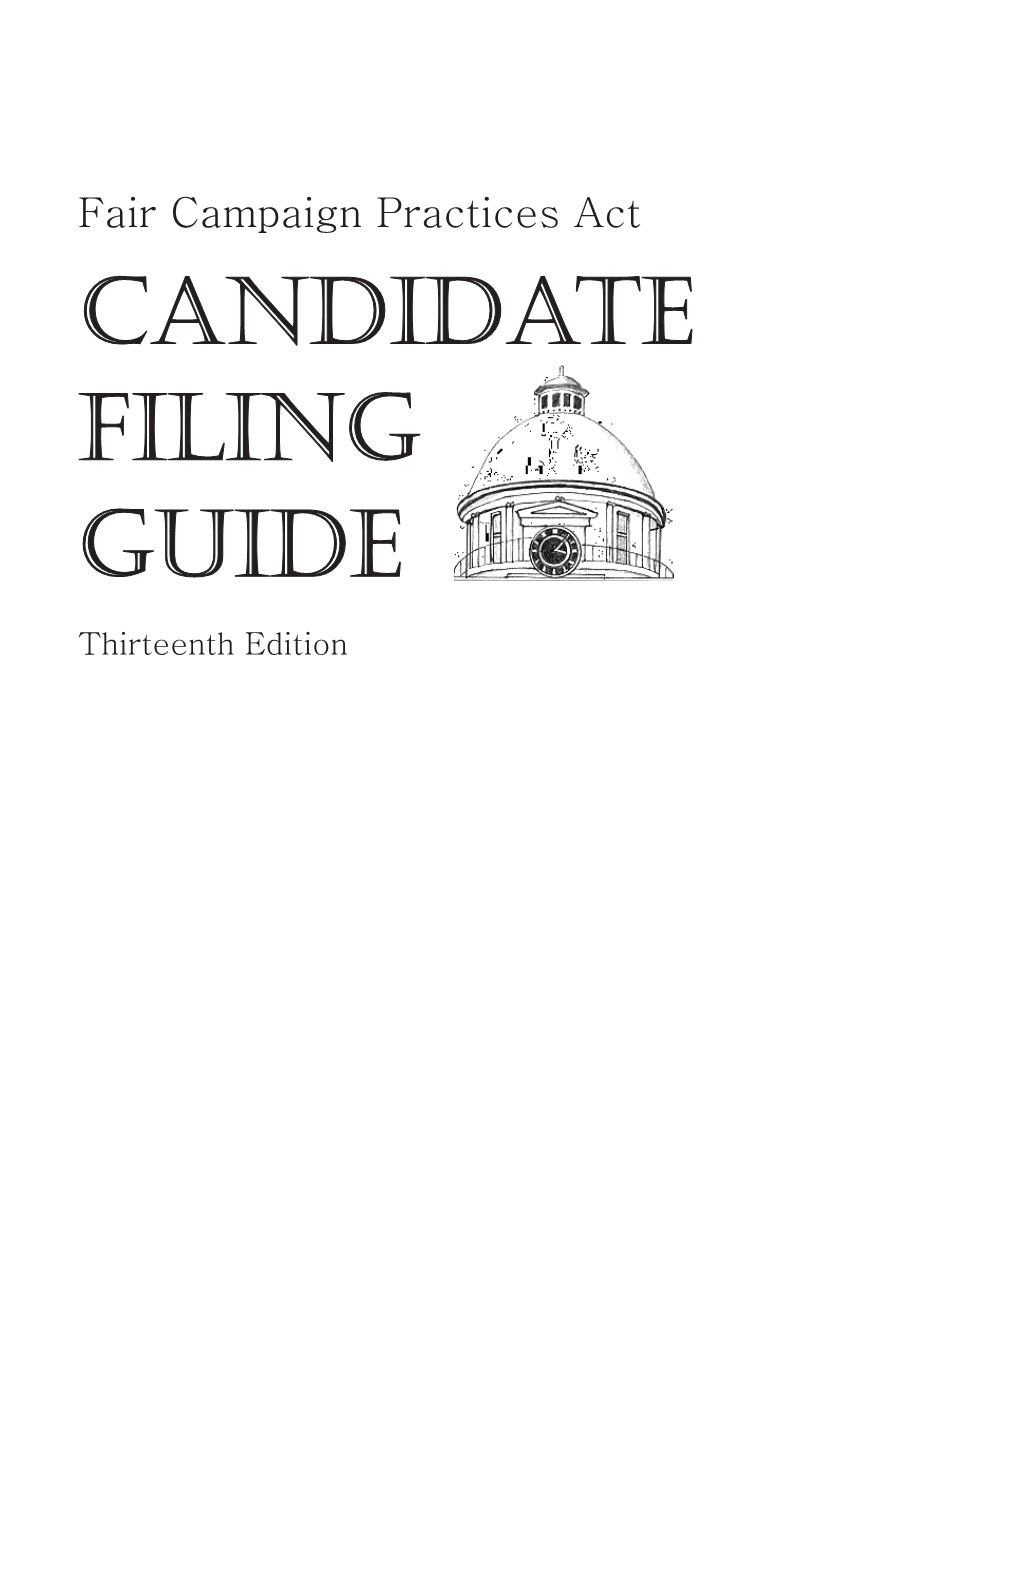 CANDIDATE FILING GUIDE Thirteenth Edition CANDIDATE CHECK LIST Filing Requirements for the Following Statements Or Reports Are Mentioned in This Publication